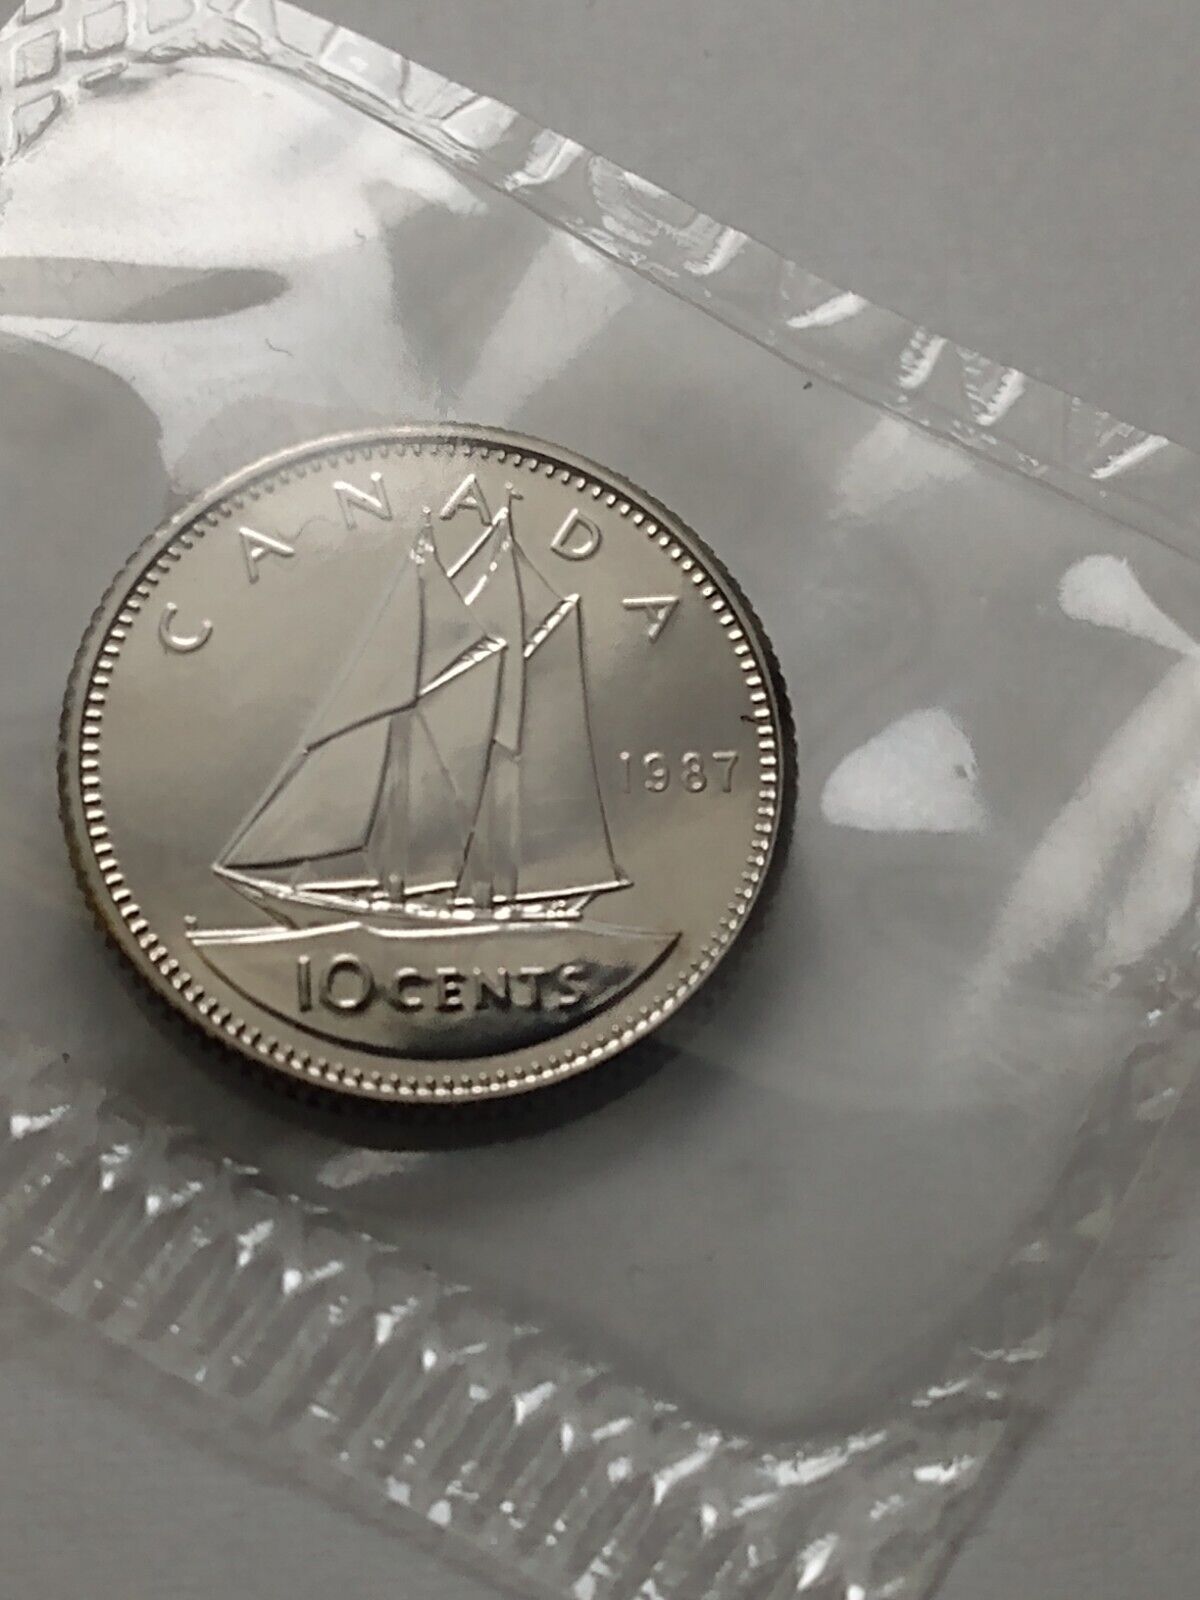 1987 "CANADA 10 CENTS DIME ""PROOF-LIKE SEALED COIN"" UNCIRCULATED"